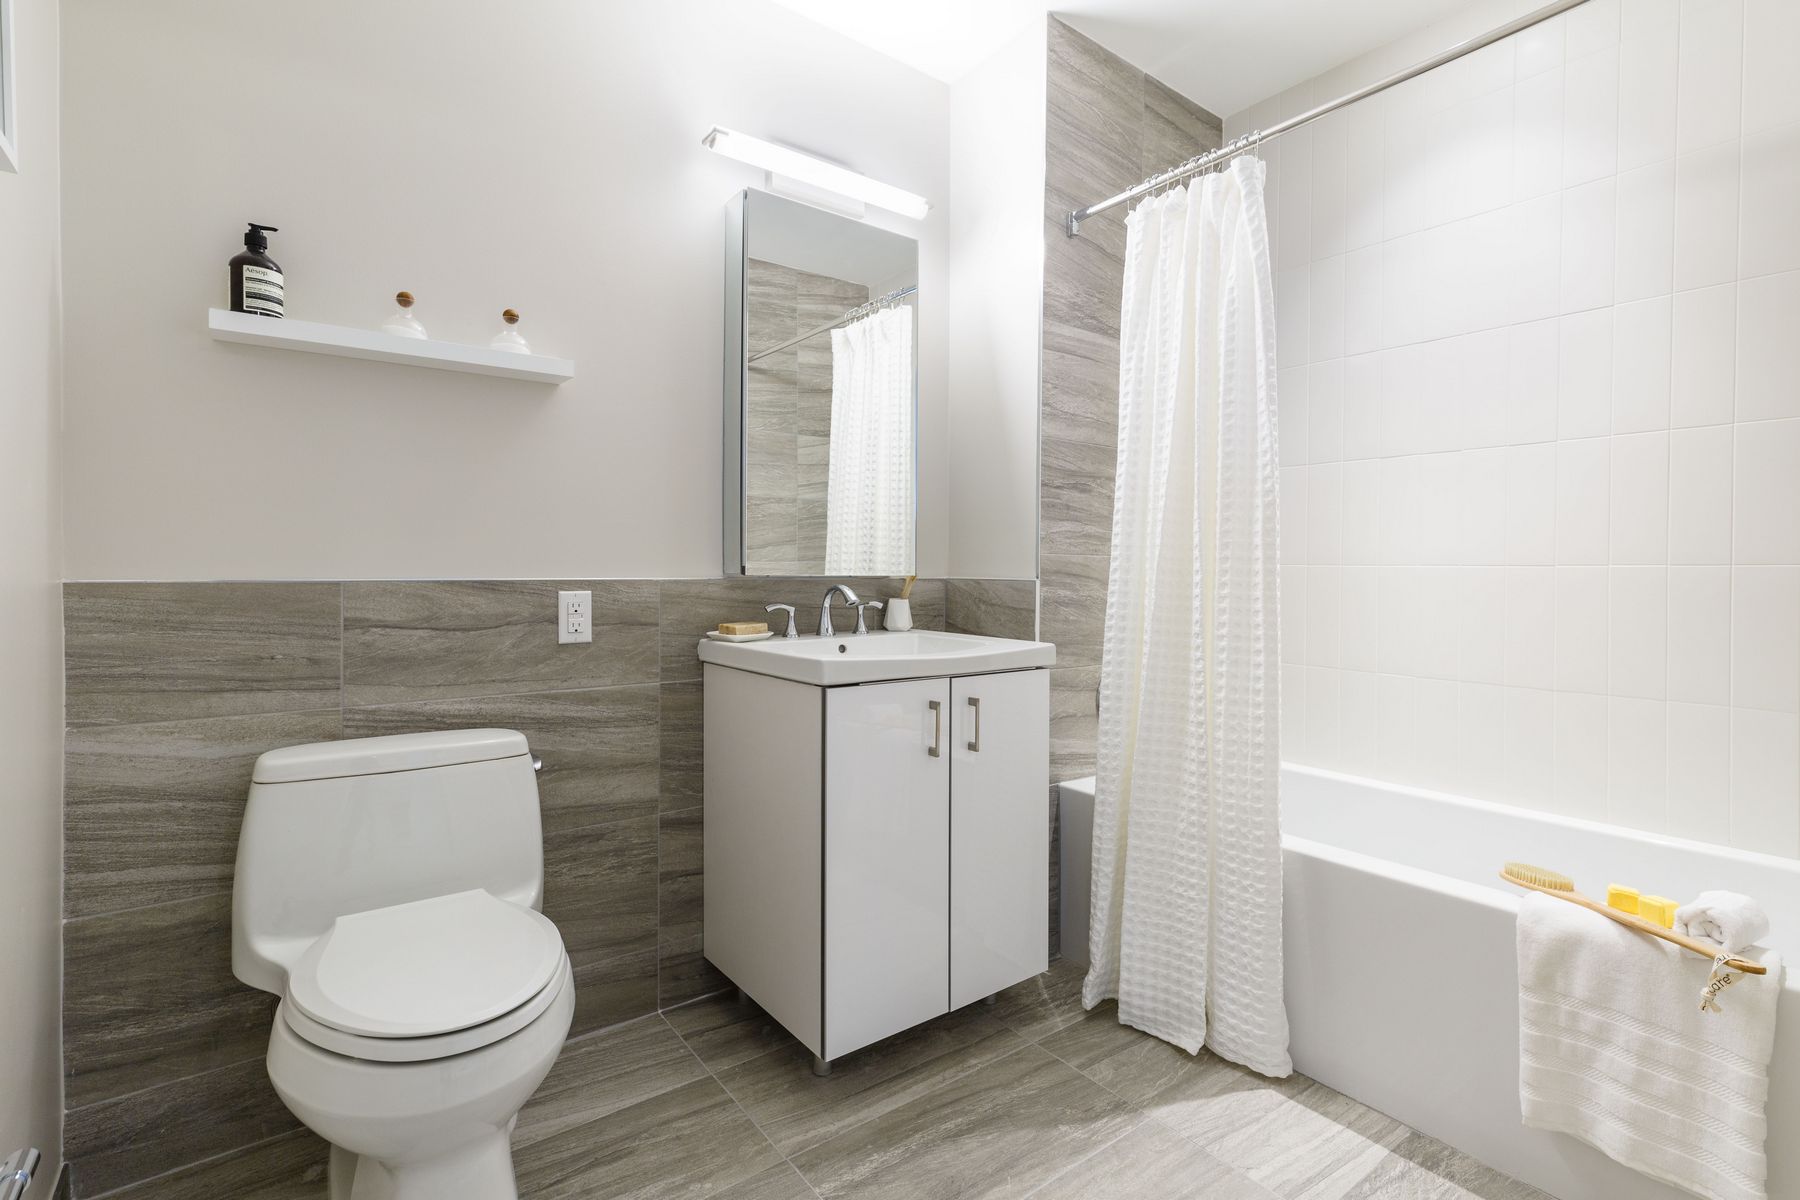 Modern bathroom with white tub shower combo, fully tiled in white and grayish marble type, single vanity with sink and mirror, large tiles on floor and partially up wall, single white shelf above white toilet